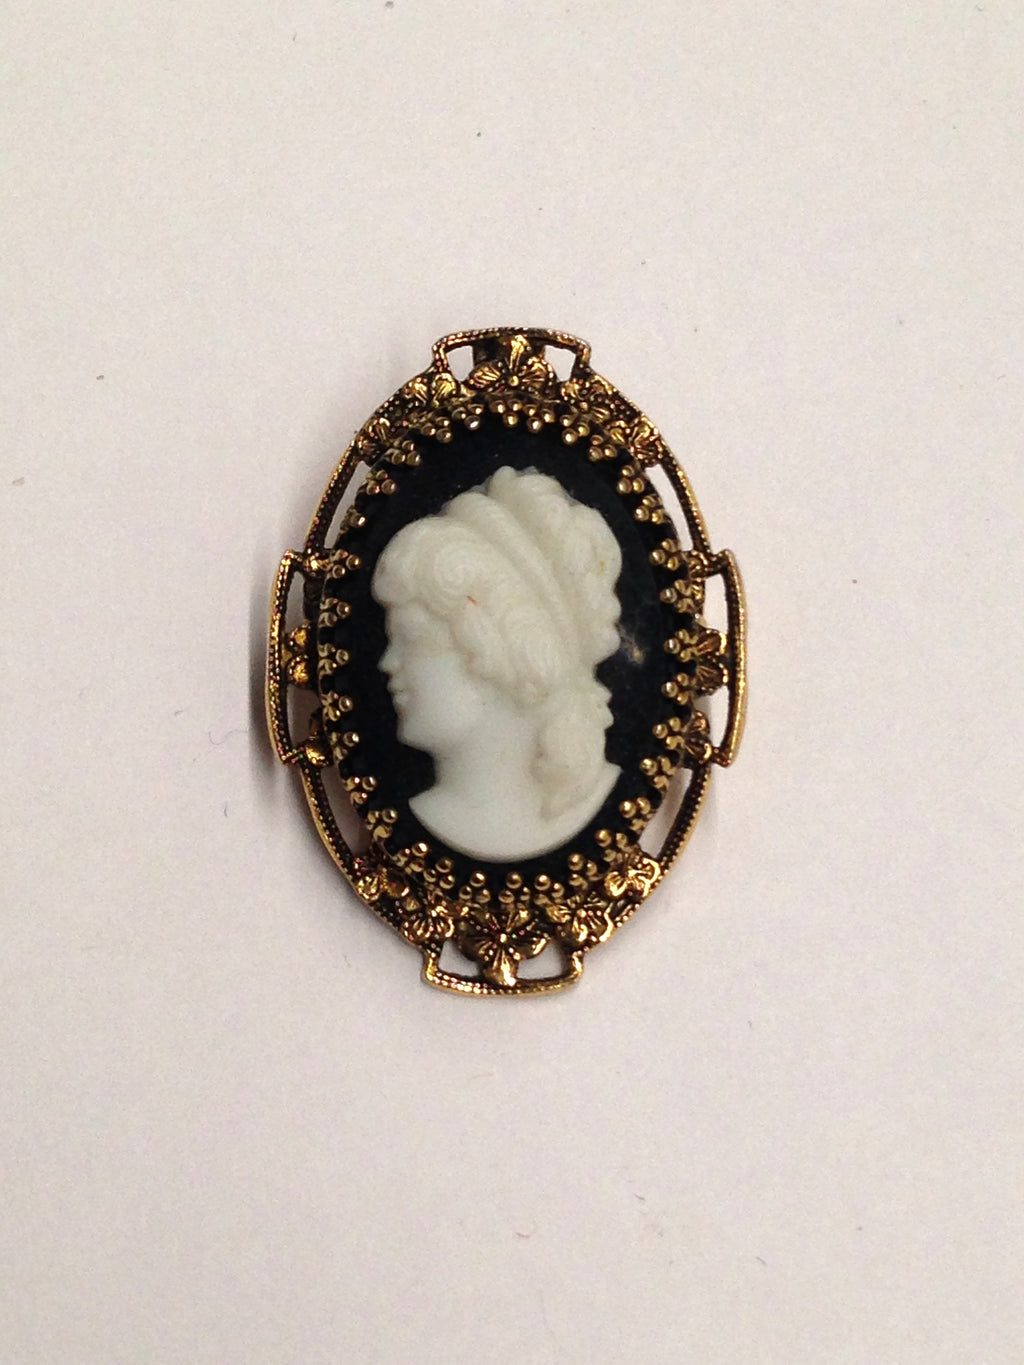 Left Facing Cameo Brooch Pin On Black Background – Hers and His Treasures